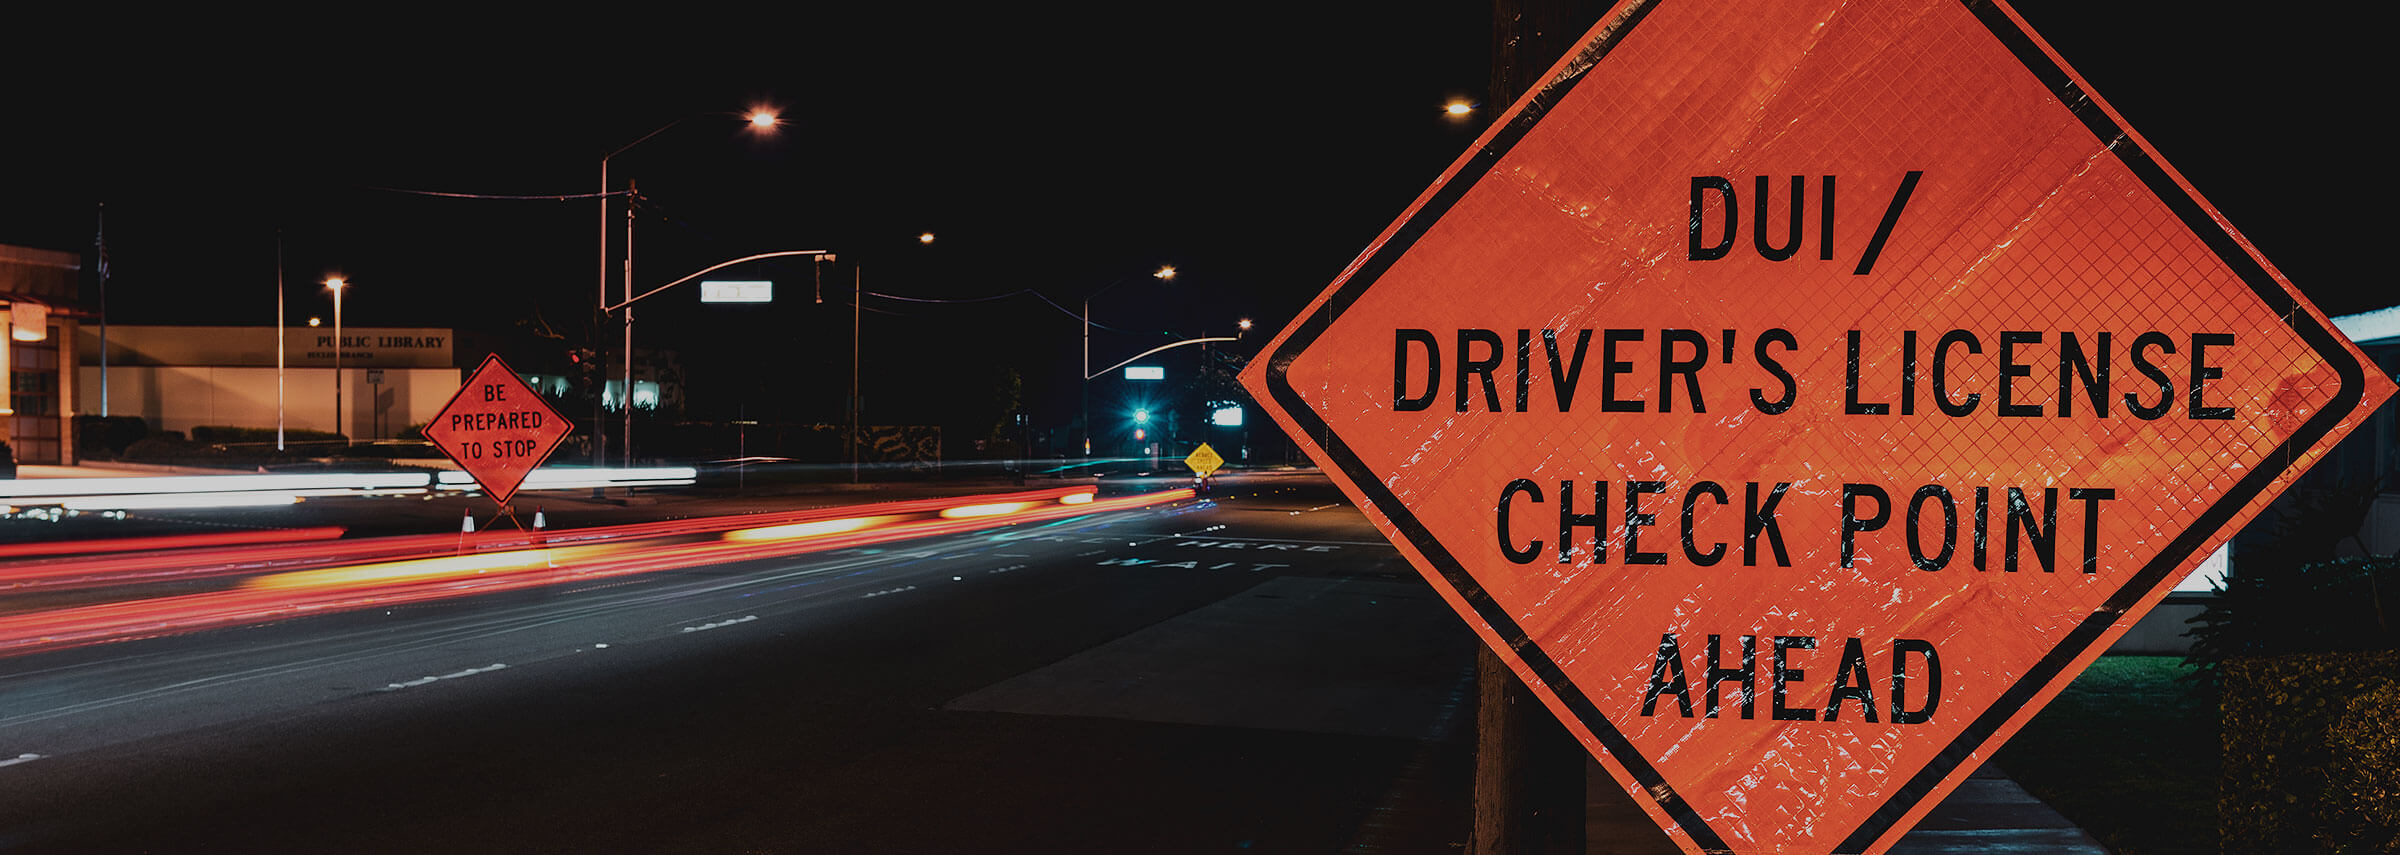 DUI checkpoints are a part of state and county dui programs.